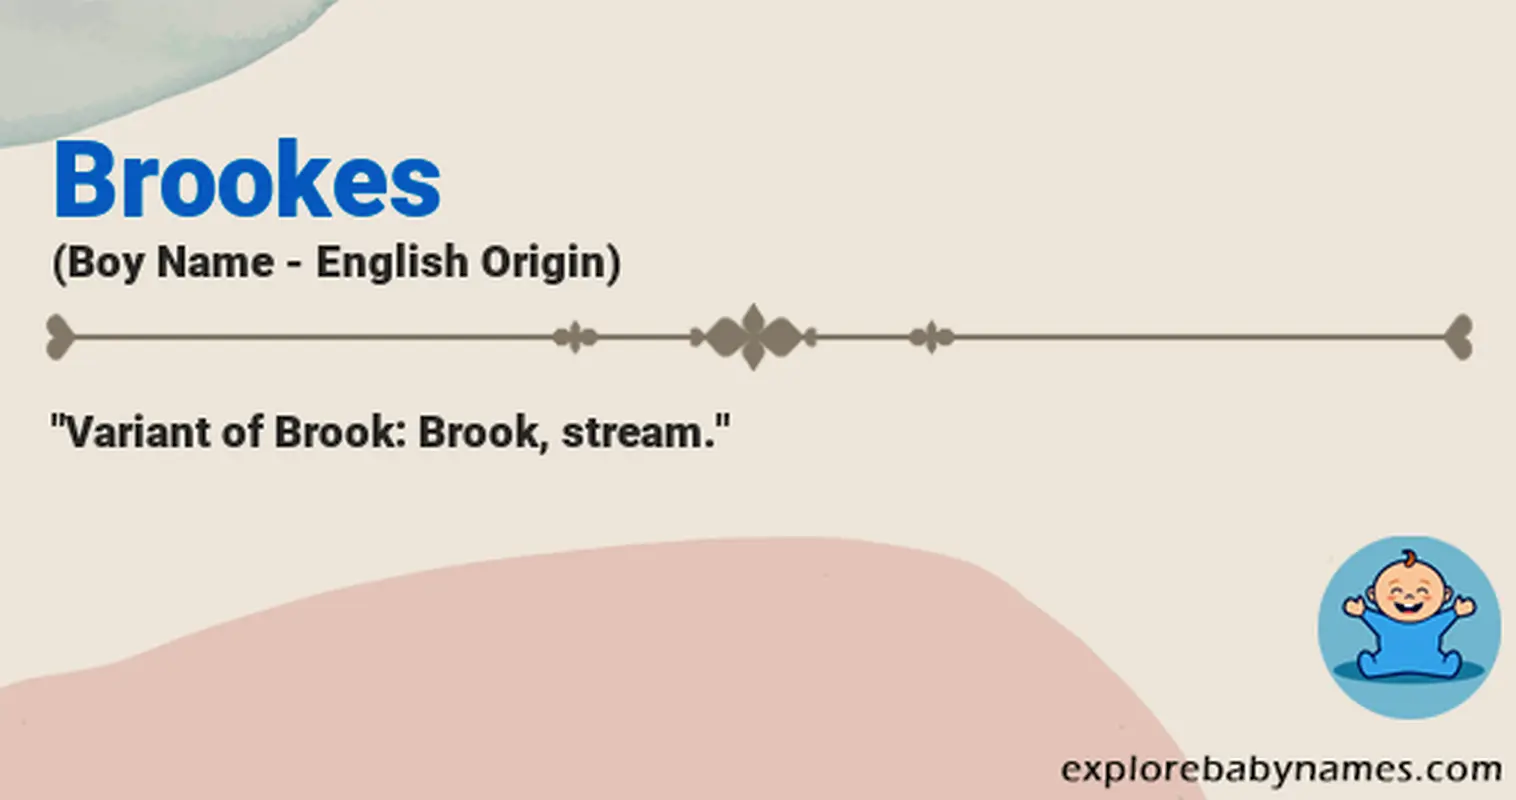 Meaning of Brookes